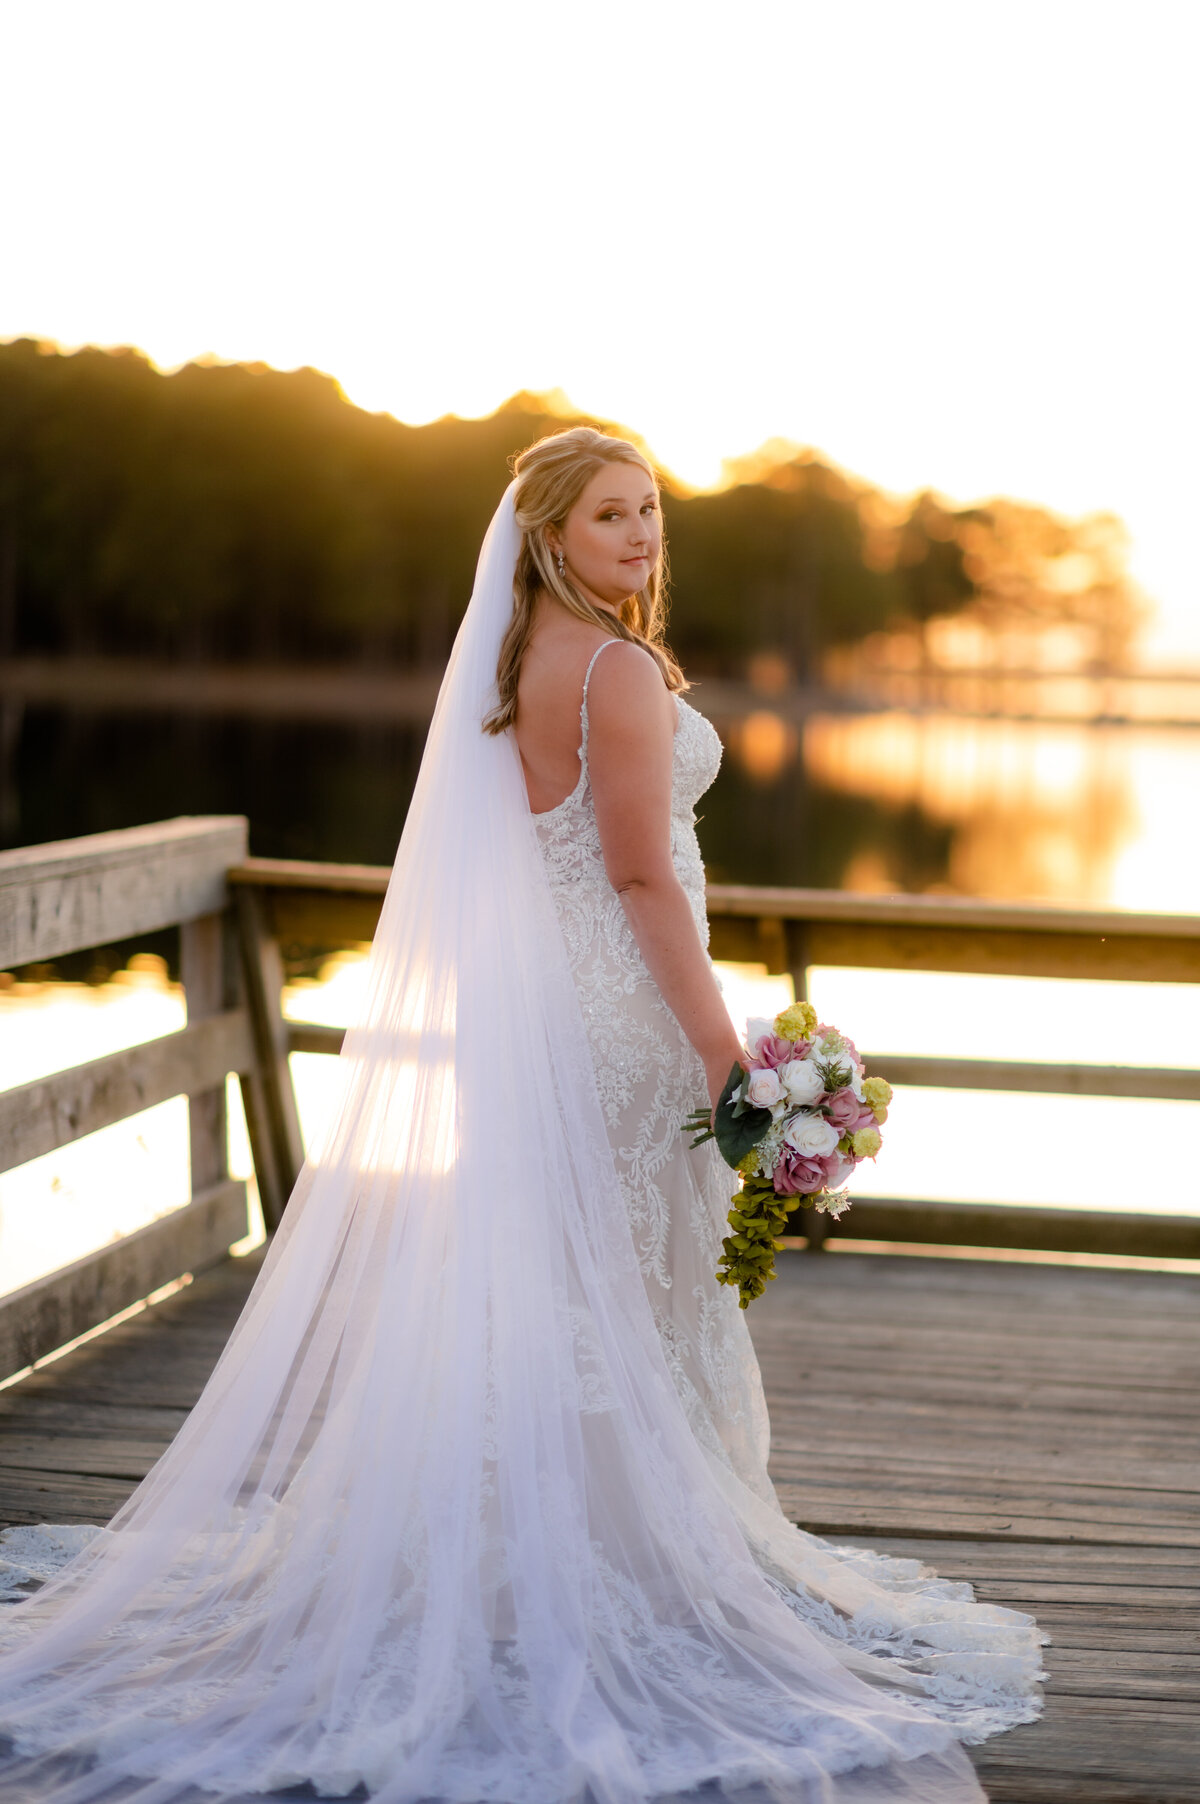 outdoor bridal session with bride at the end of a dock looking back over her shoulder to the camera while the sun sets behind her